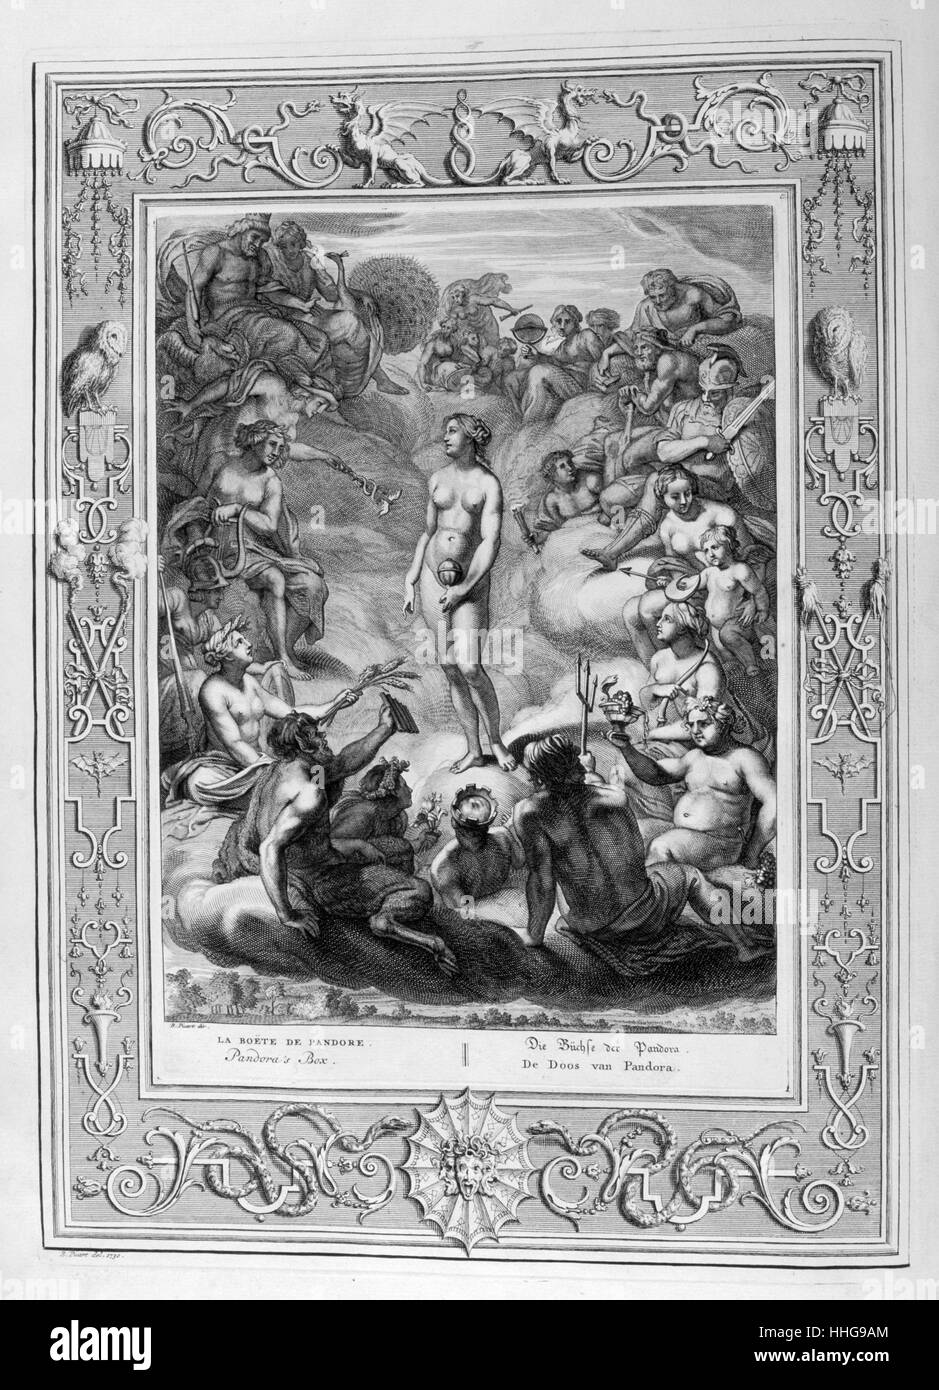 Prometheus devoured by the eagle. Engraved illustration from 'The Temple of the Muses', 1733. This book represented remarkable events of antiquity drawn and engraved by Bernard Picart (1673-1733). In Greek mythology, Prometheus was the deity who was the creator of mankind and its greatest benefactor, who stole fire from Mount Olympus and gave it to mankind. Prometheus, in eternal punishment, is chained to a rock in the Caucasus, Kazbek Mountain or Mountain of Khvamli, where his liver is eaten daily by an eagle Stock Photo